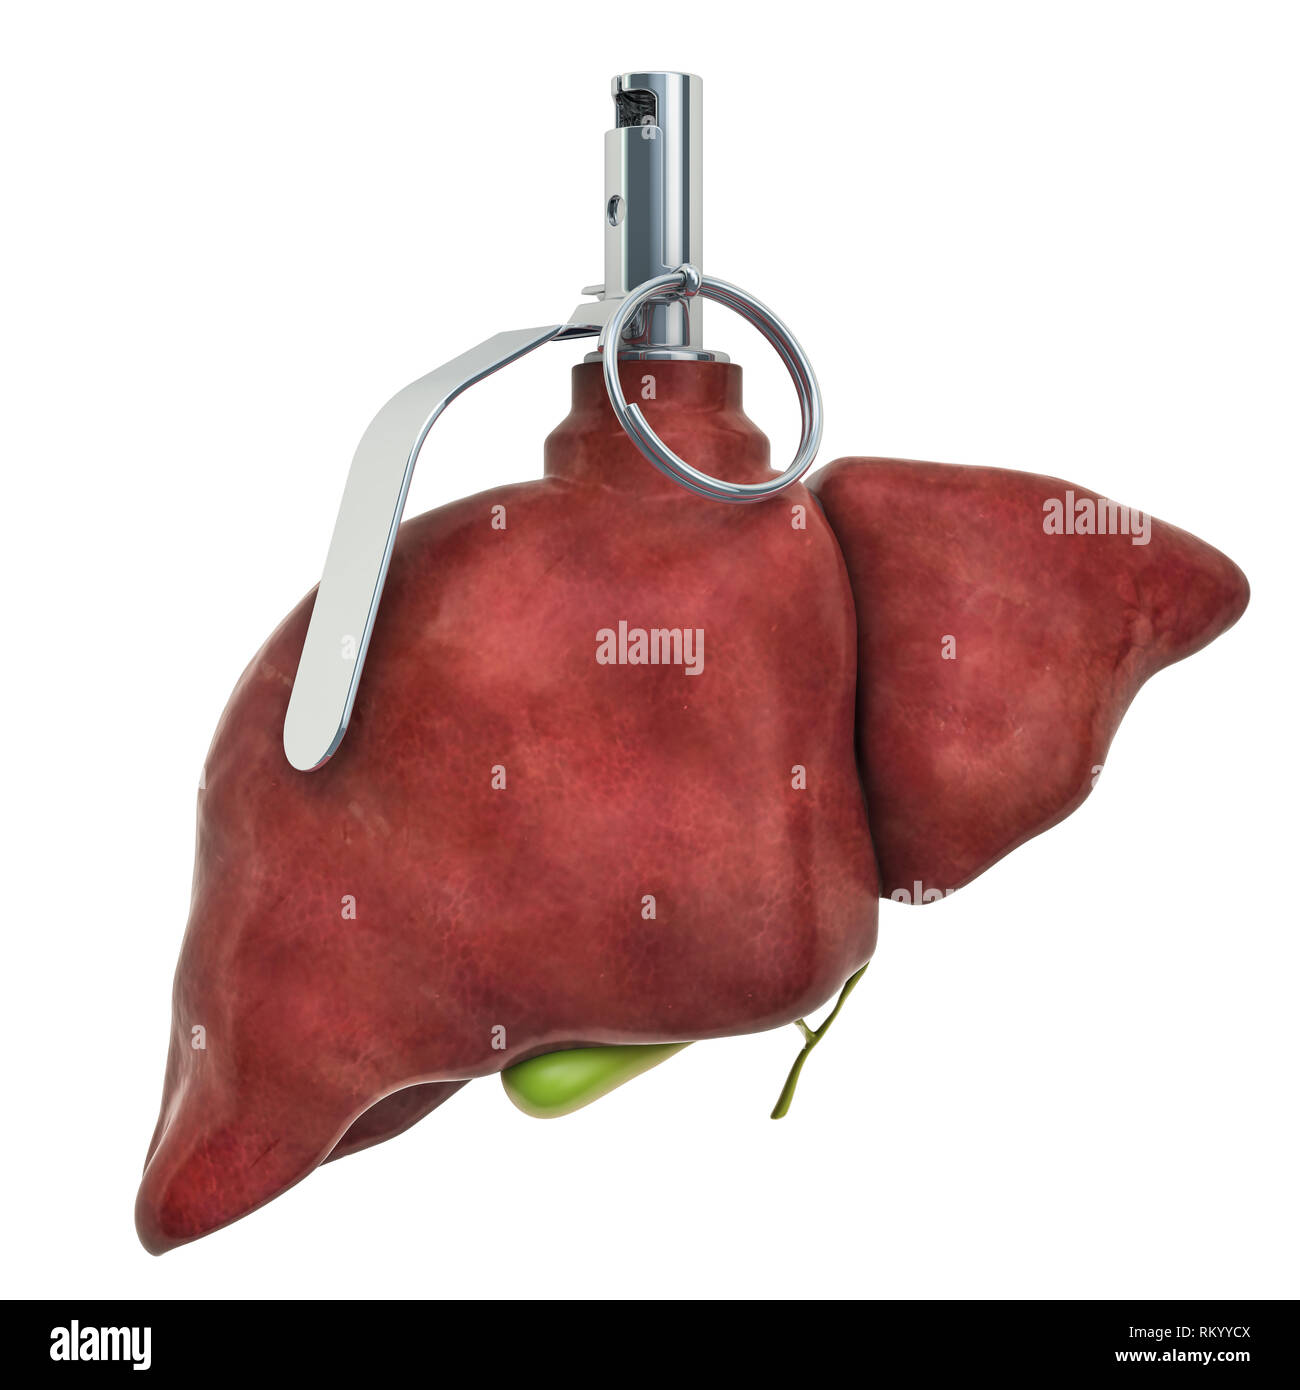 Pain in liver, liver disease concept. Human liver as hand grenade. 3D rendering isolated on white background Stock Photo